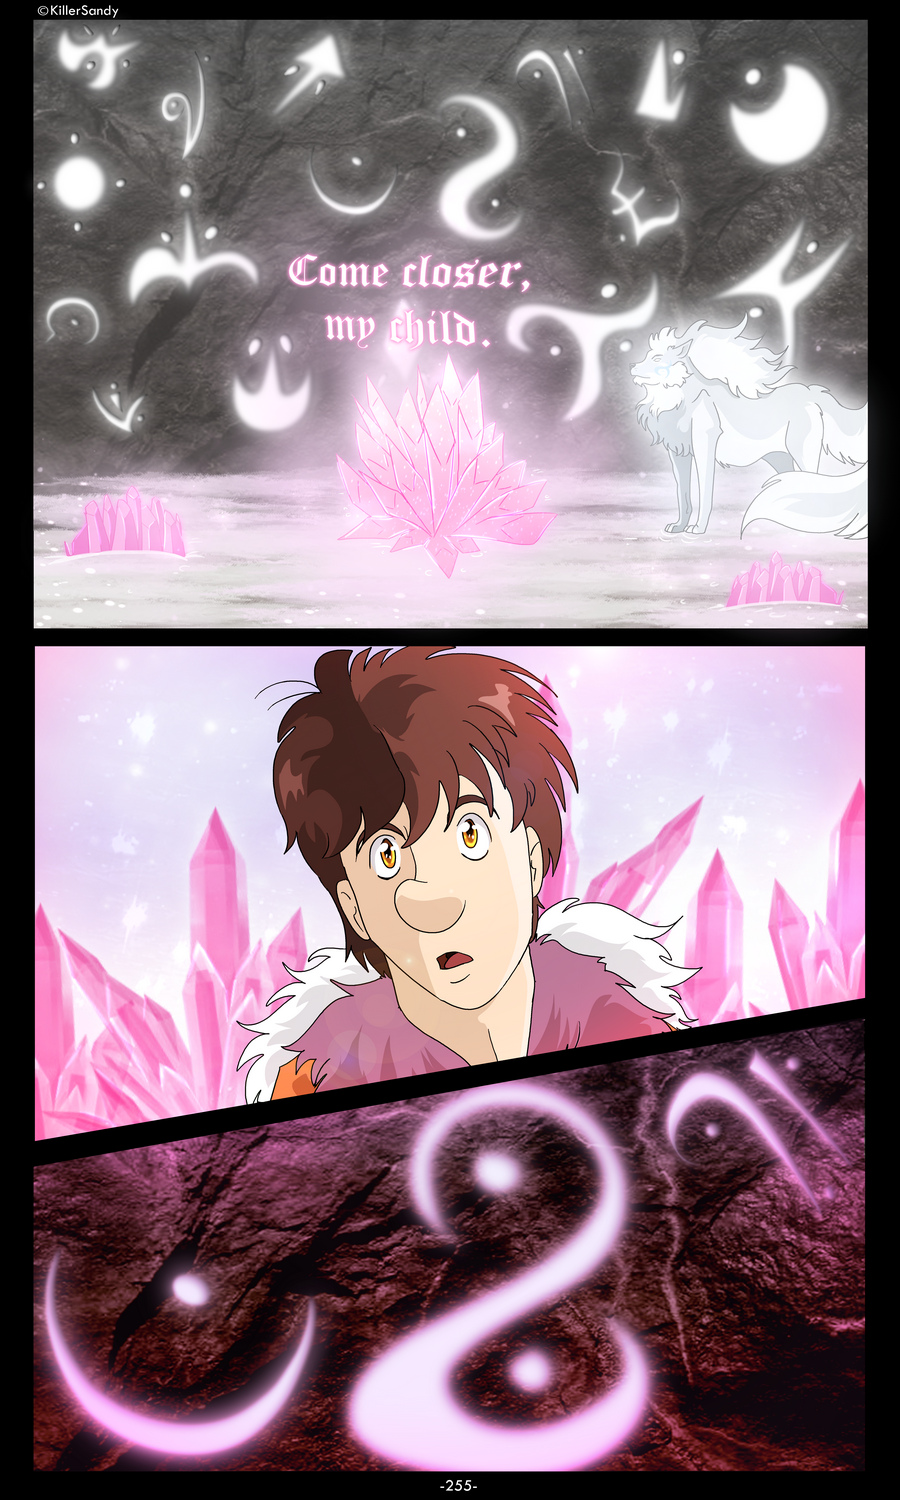 The Prince of the Moonlight Stone page 255